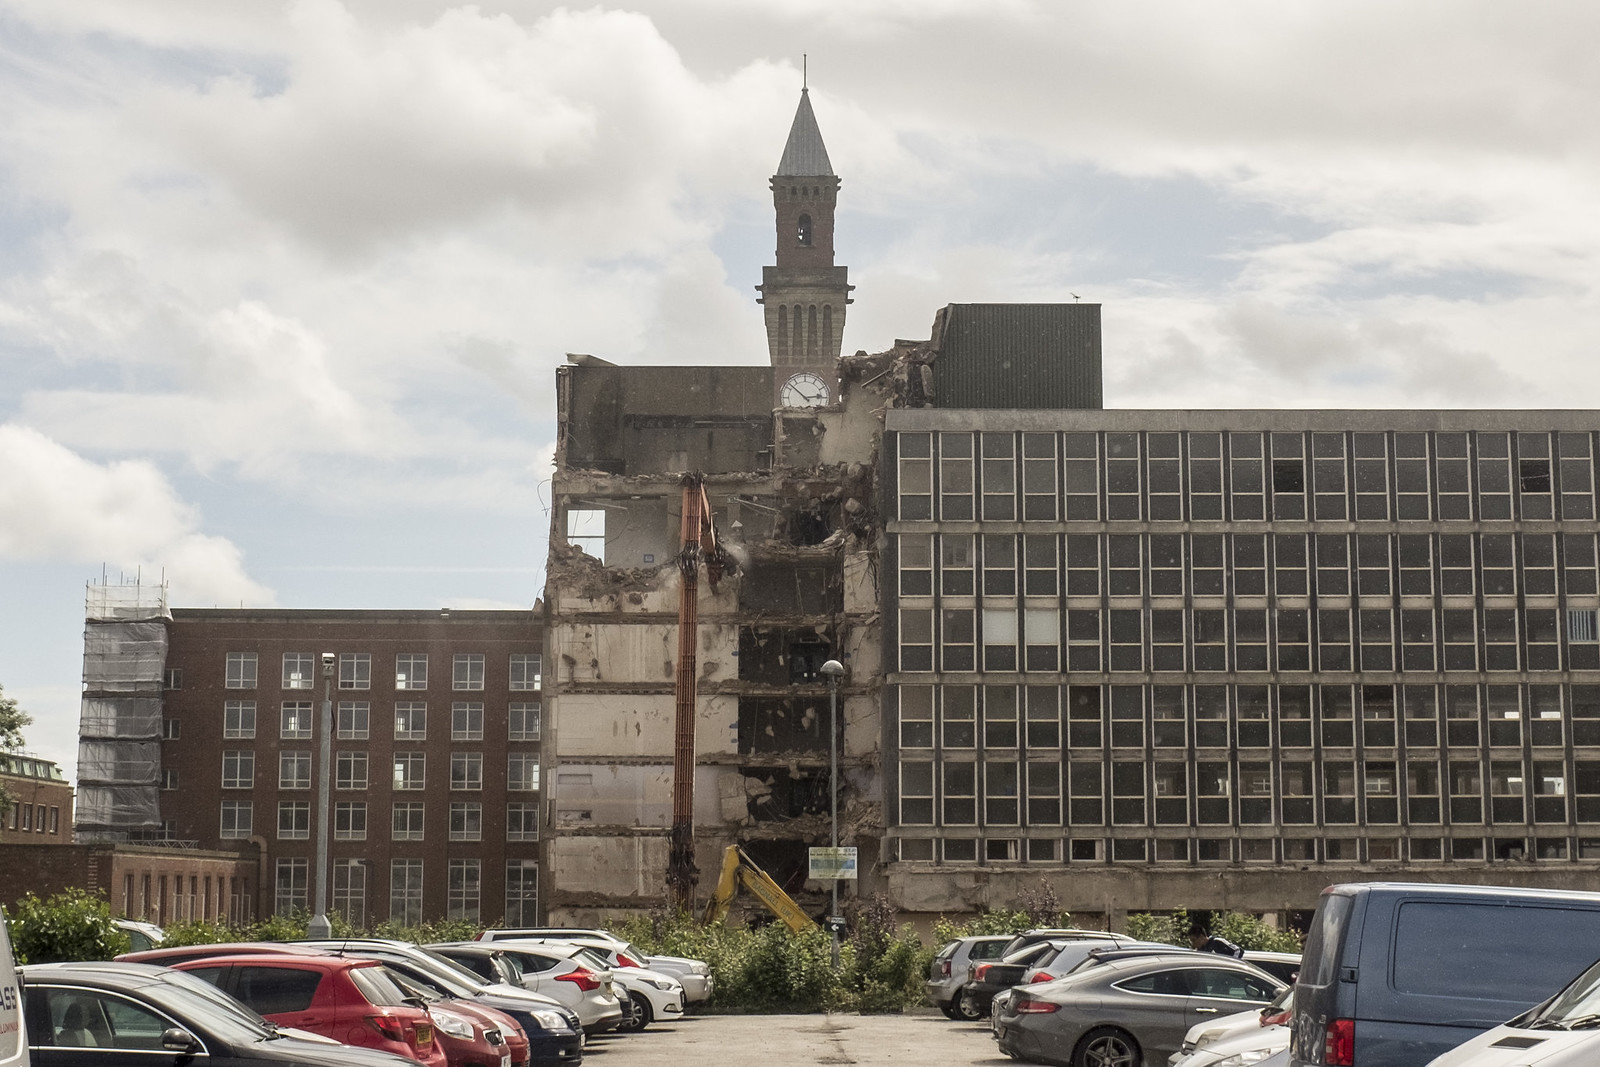 Demolition of the old library at the University of Birmingham